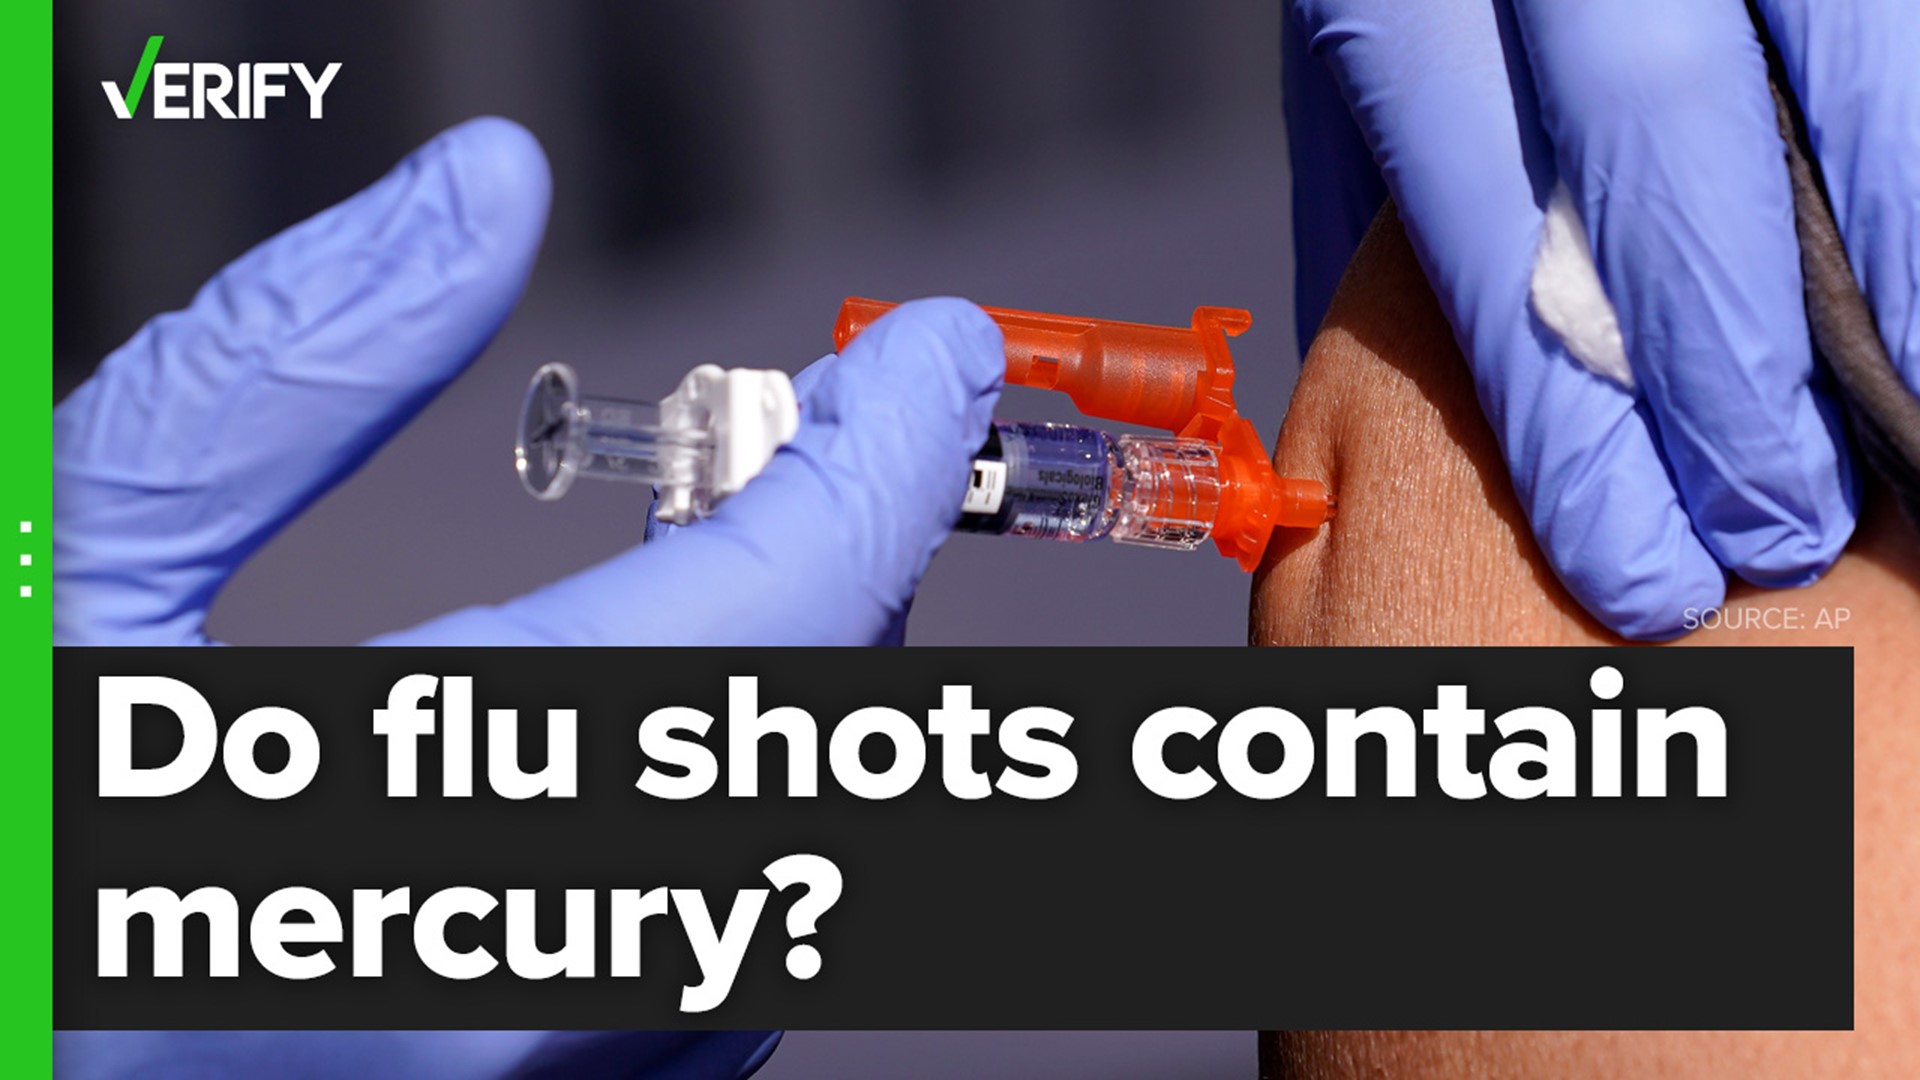 Most flu shots administered in the U.S. do not contain thimerosal, an ethylmercury-based preservative, due to the development of single-dose vaccines.